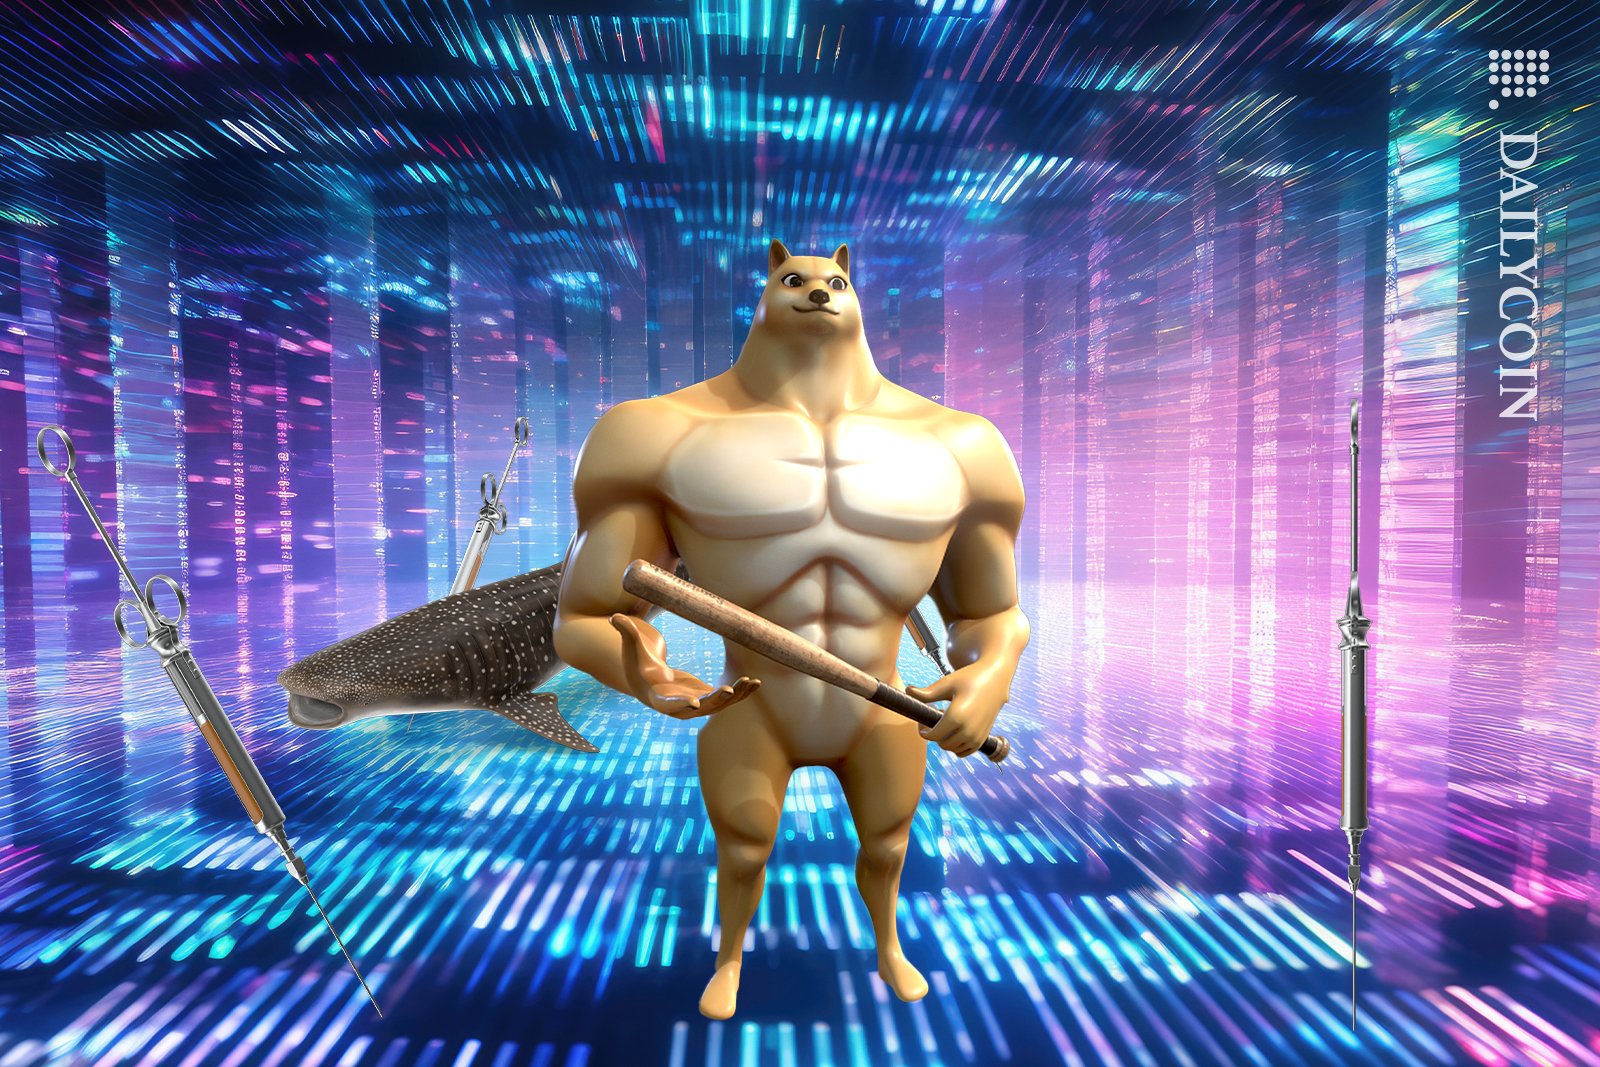 Doge ready to fight, whales surrounded with syringe's on digital land.